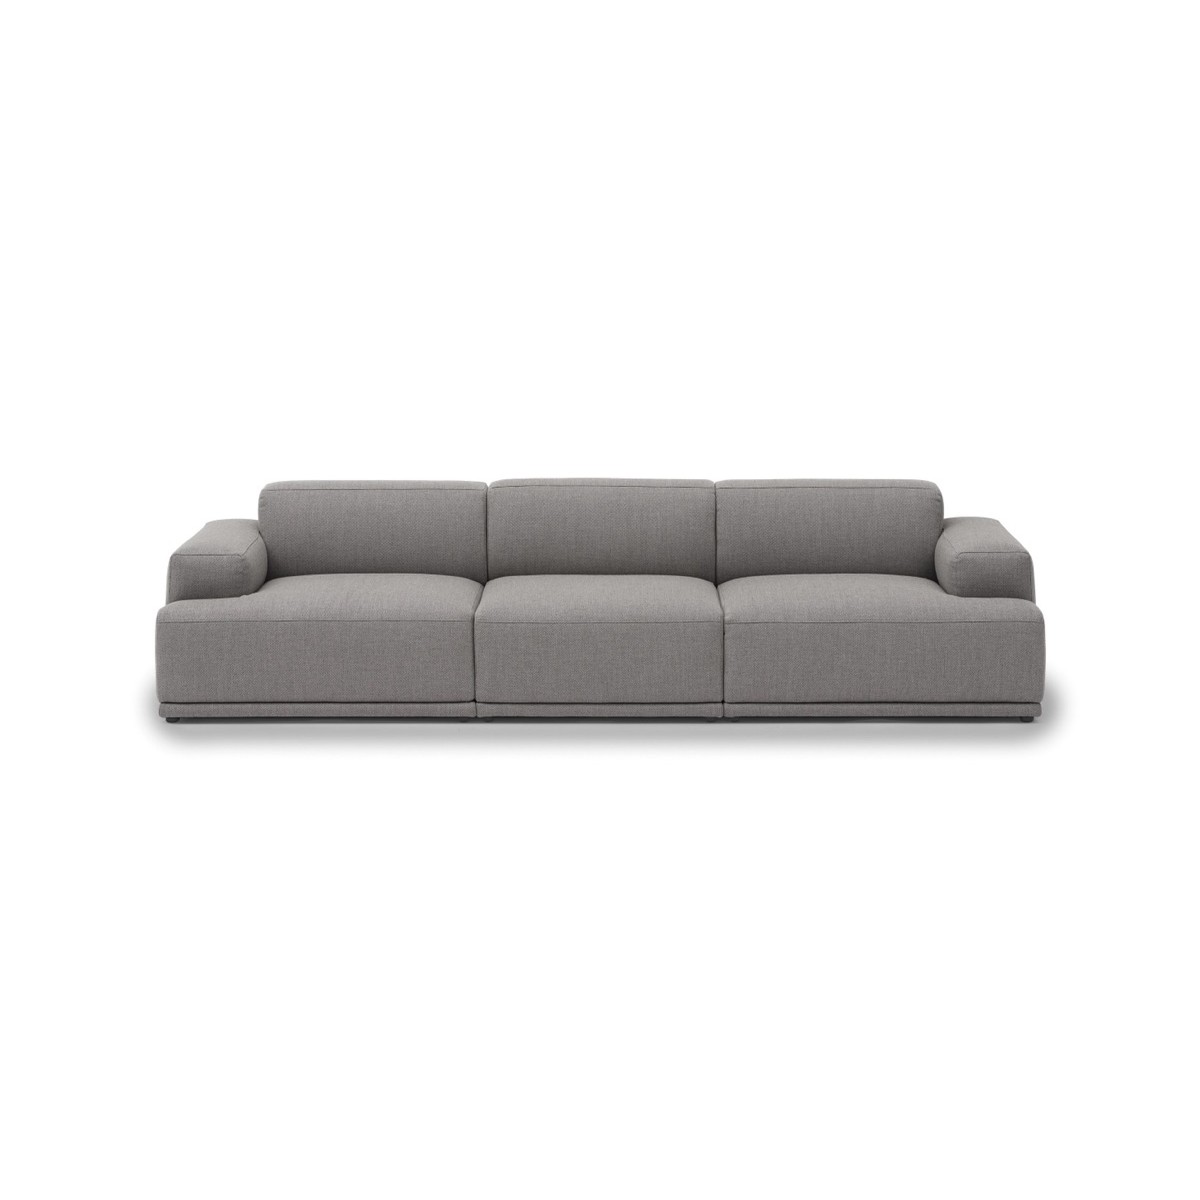 Connect Soft - 3 seater sofa, Configuration 1 - Re-Wool 128 fabric